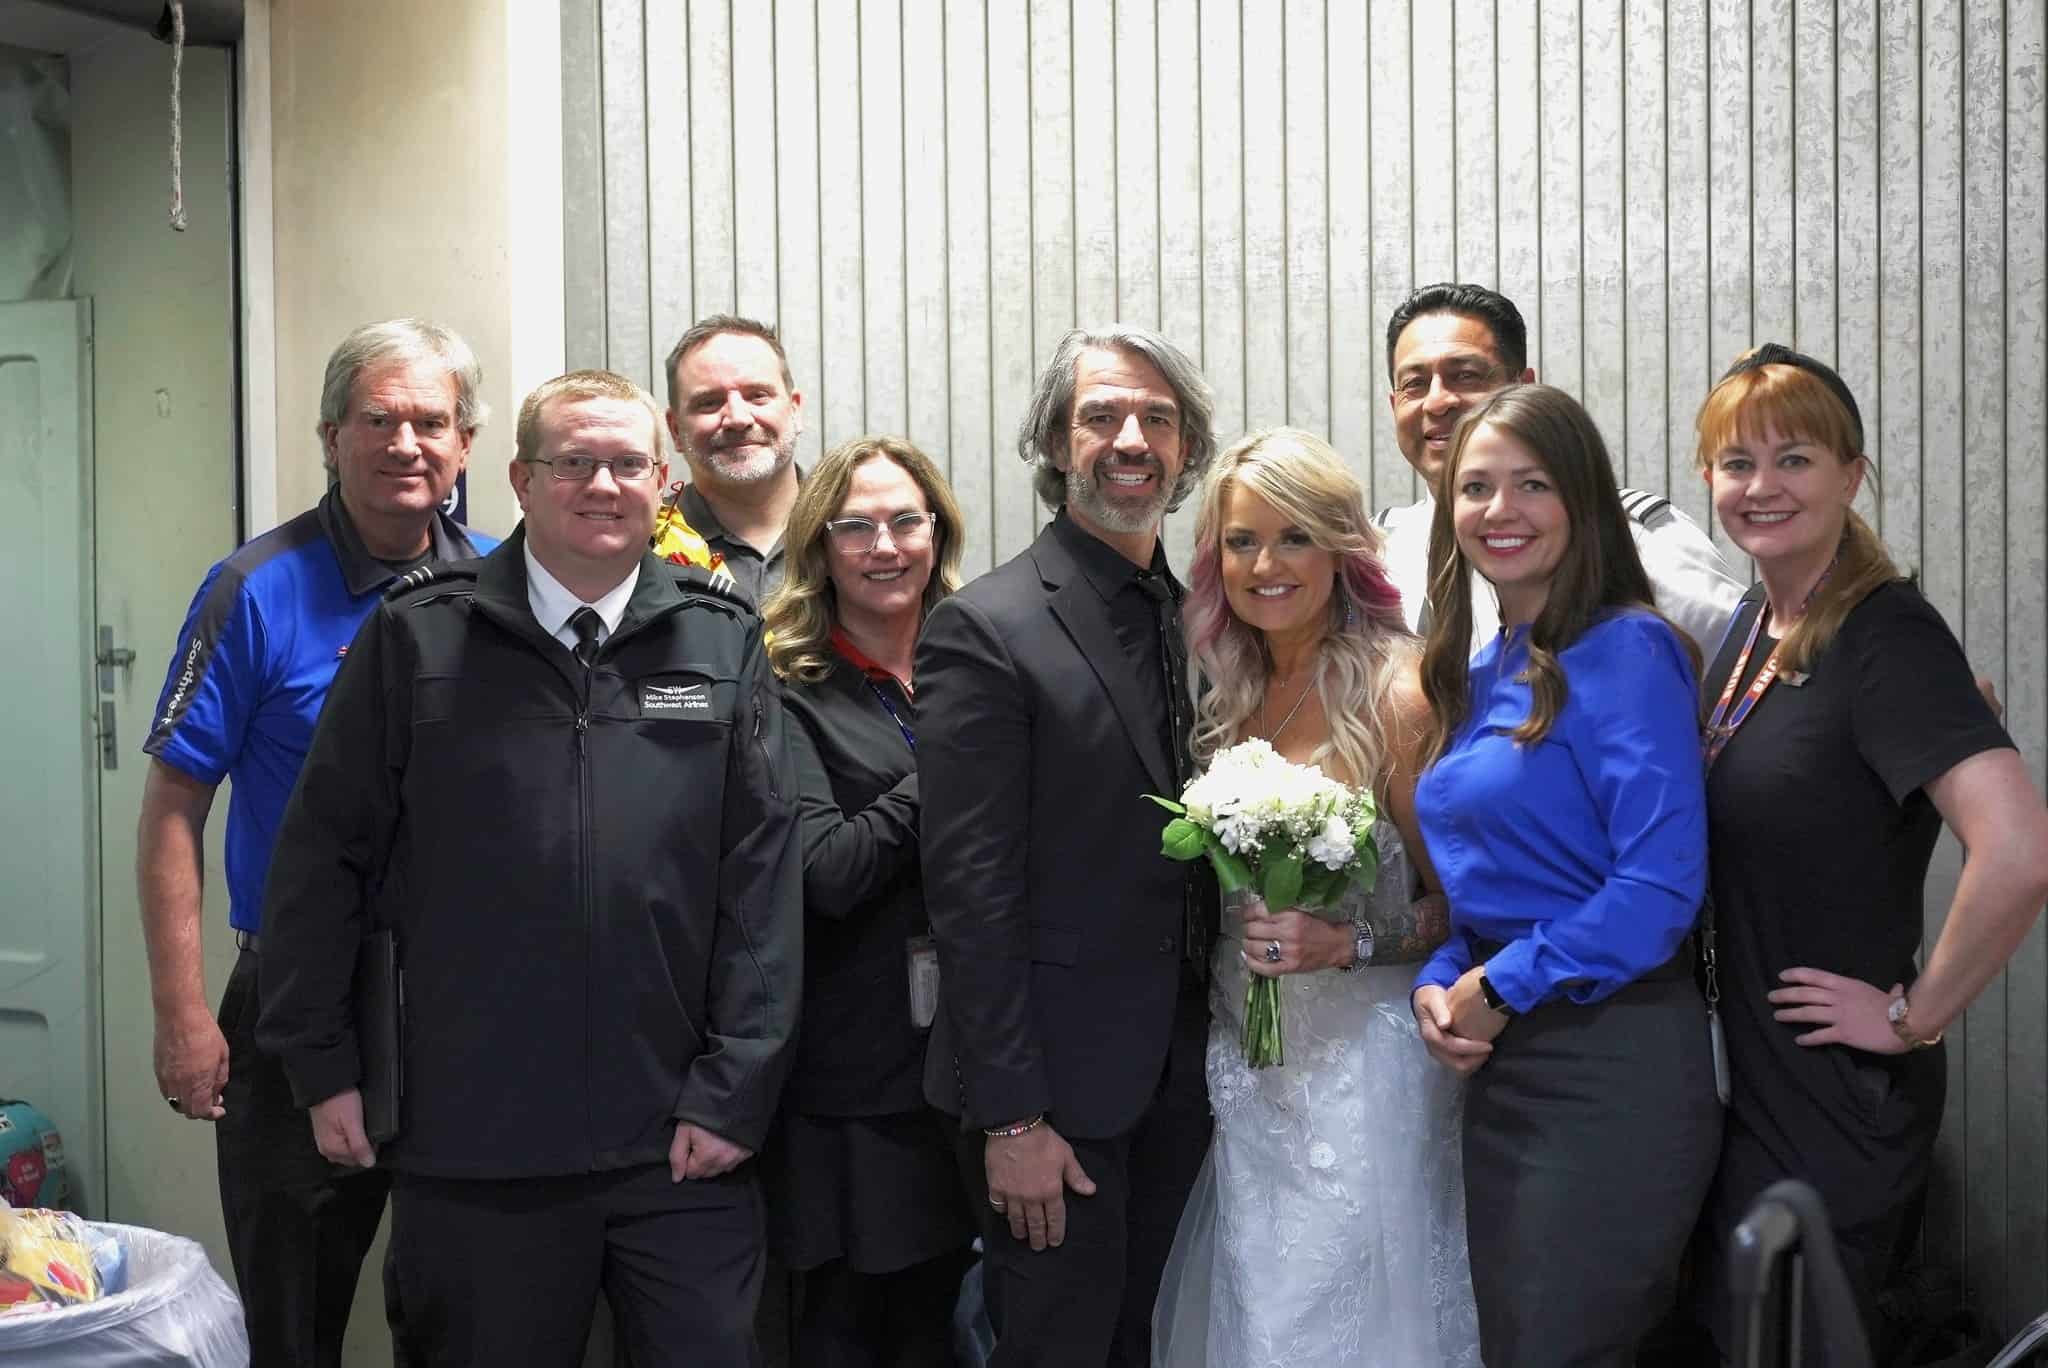 Couple Ties the Knot on Southwest Airlines Flight